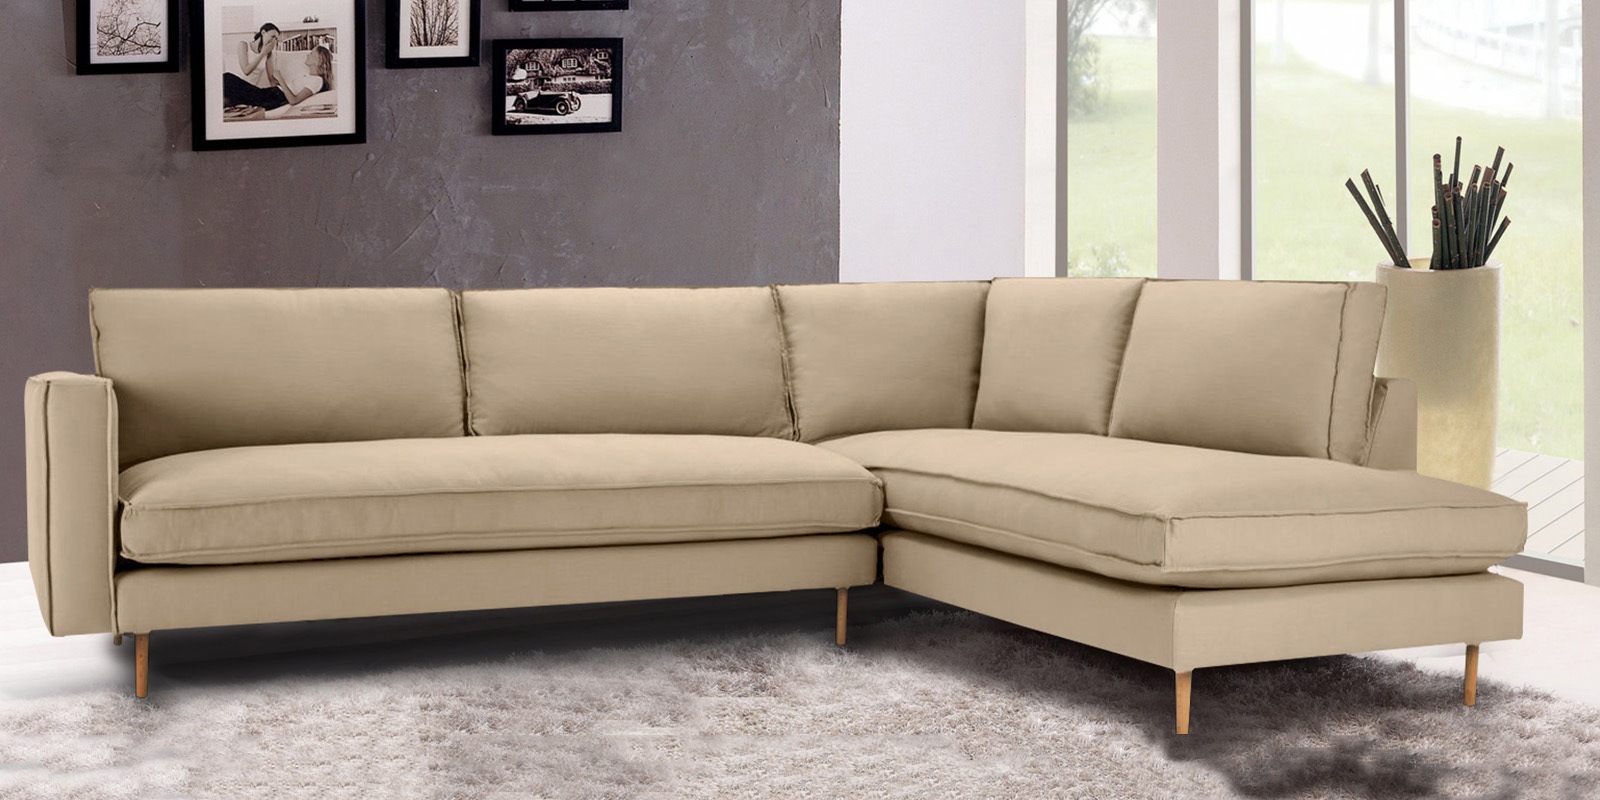 Lhs Sectional Sofa In Beige Colour